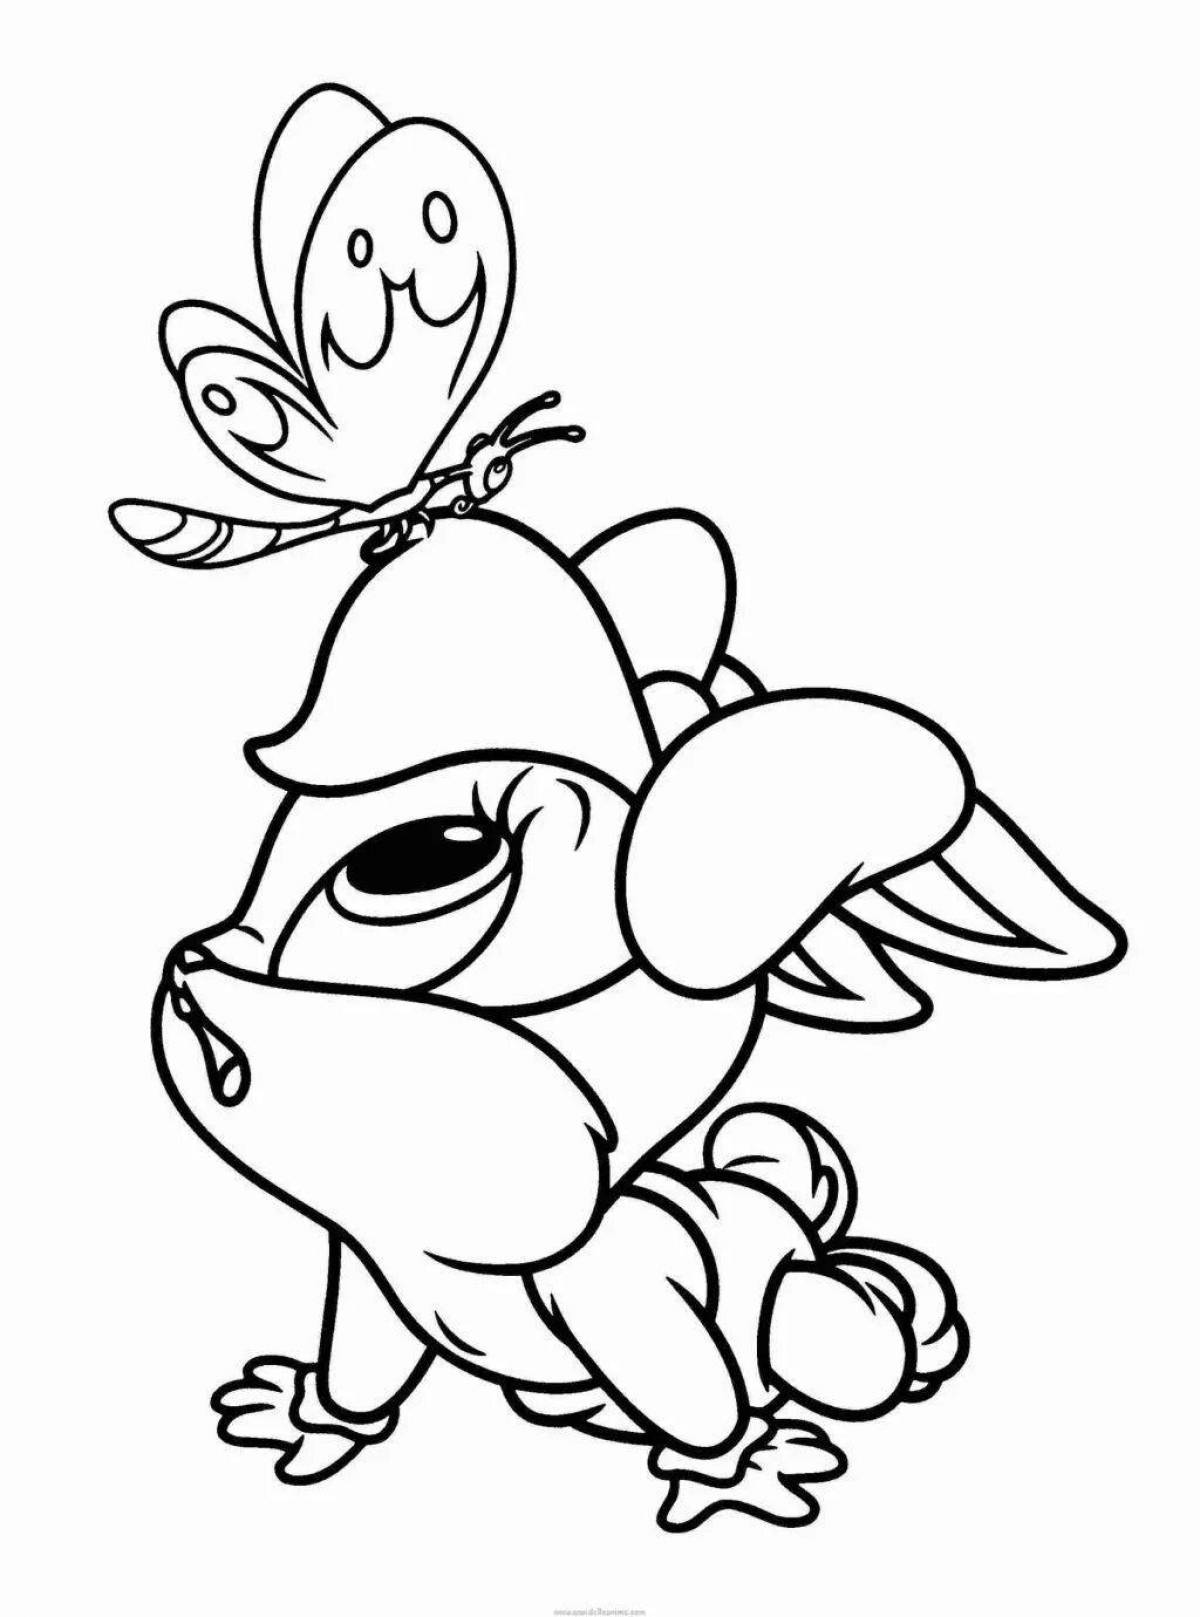 Color frenzy cartoon character coloring page